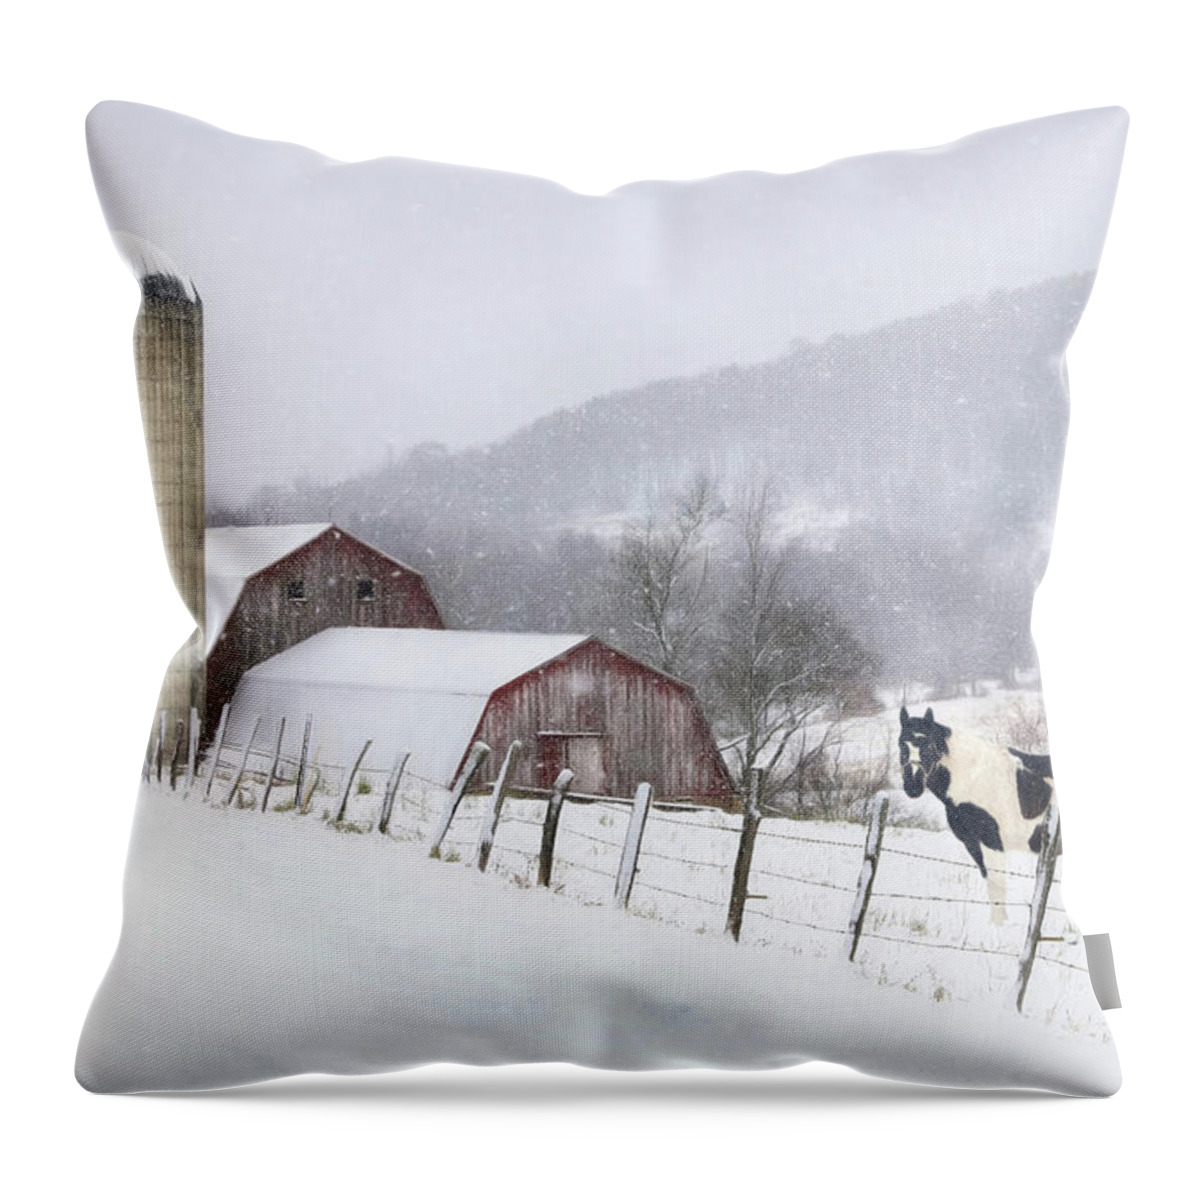 Snow Throw Pillow featuring the photograph Take a Snow Day by Lori Deiter